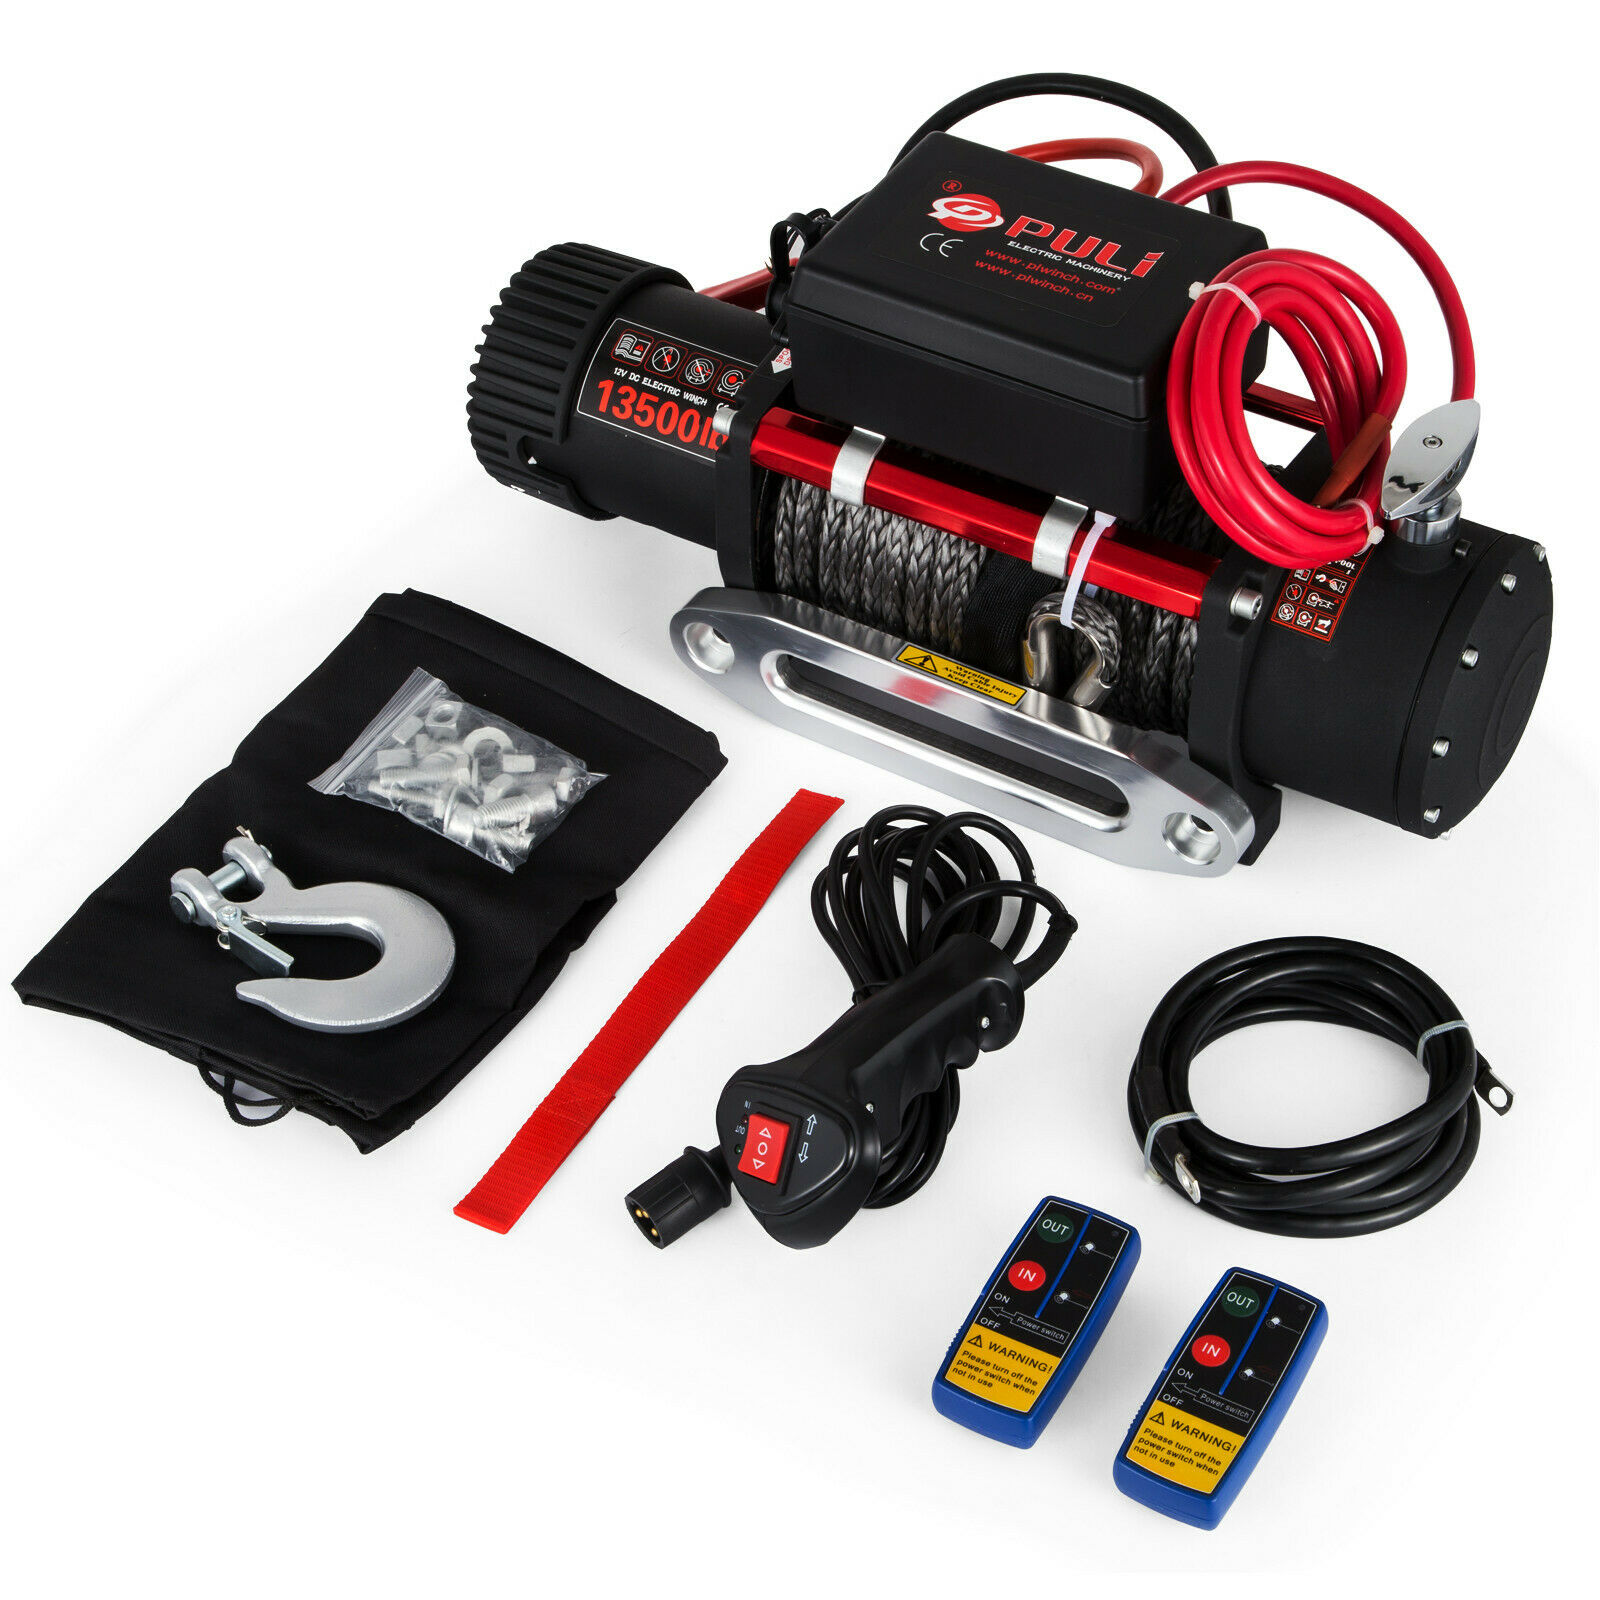 12V Electric Winch ATV Recovery Winch 6120 KG 13500LBS Winch Synthetic Rope with Remote Control for ATV UTV